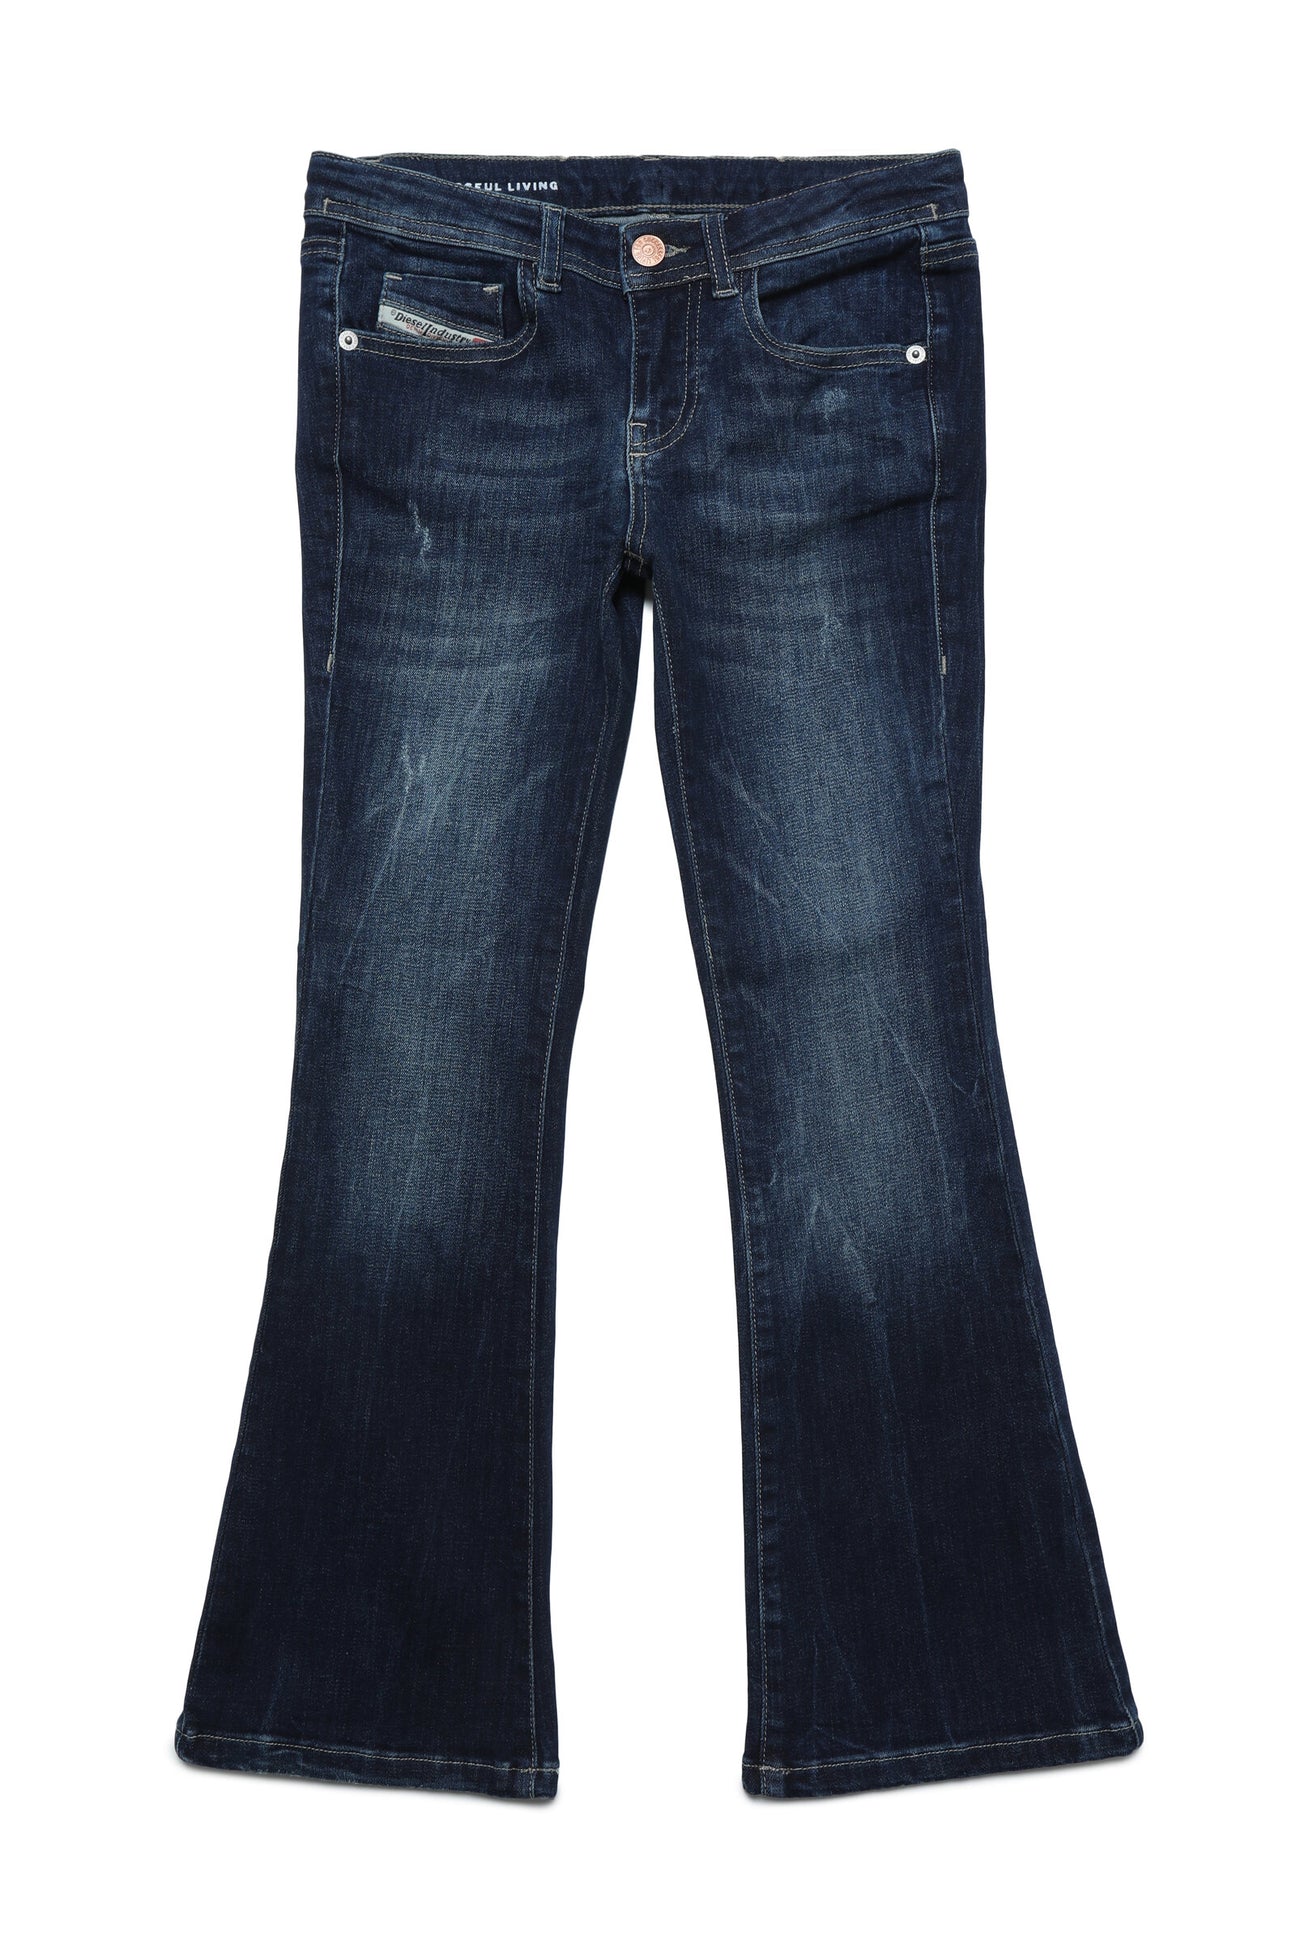 Jeans 1969 D-Ebbey bootcut dark blue with abrasions Jeans 1969 D-Ebbey bootcut dark blue with abrasions